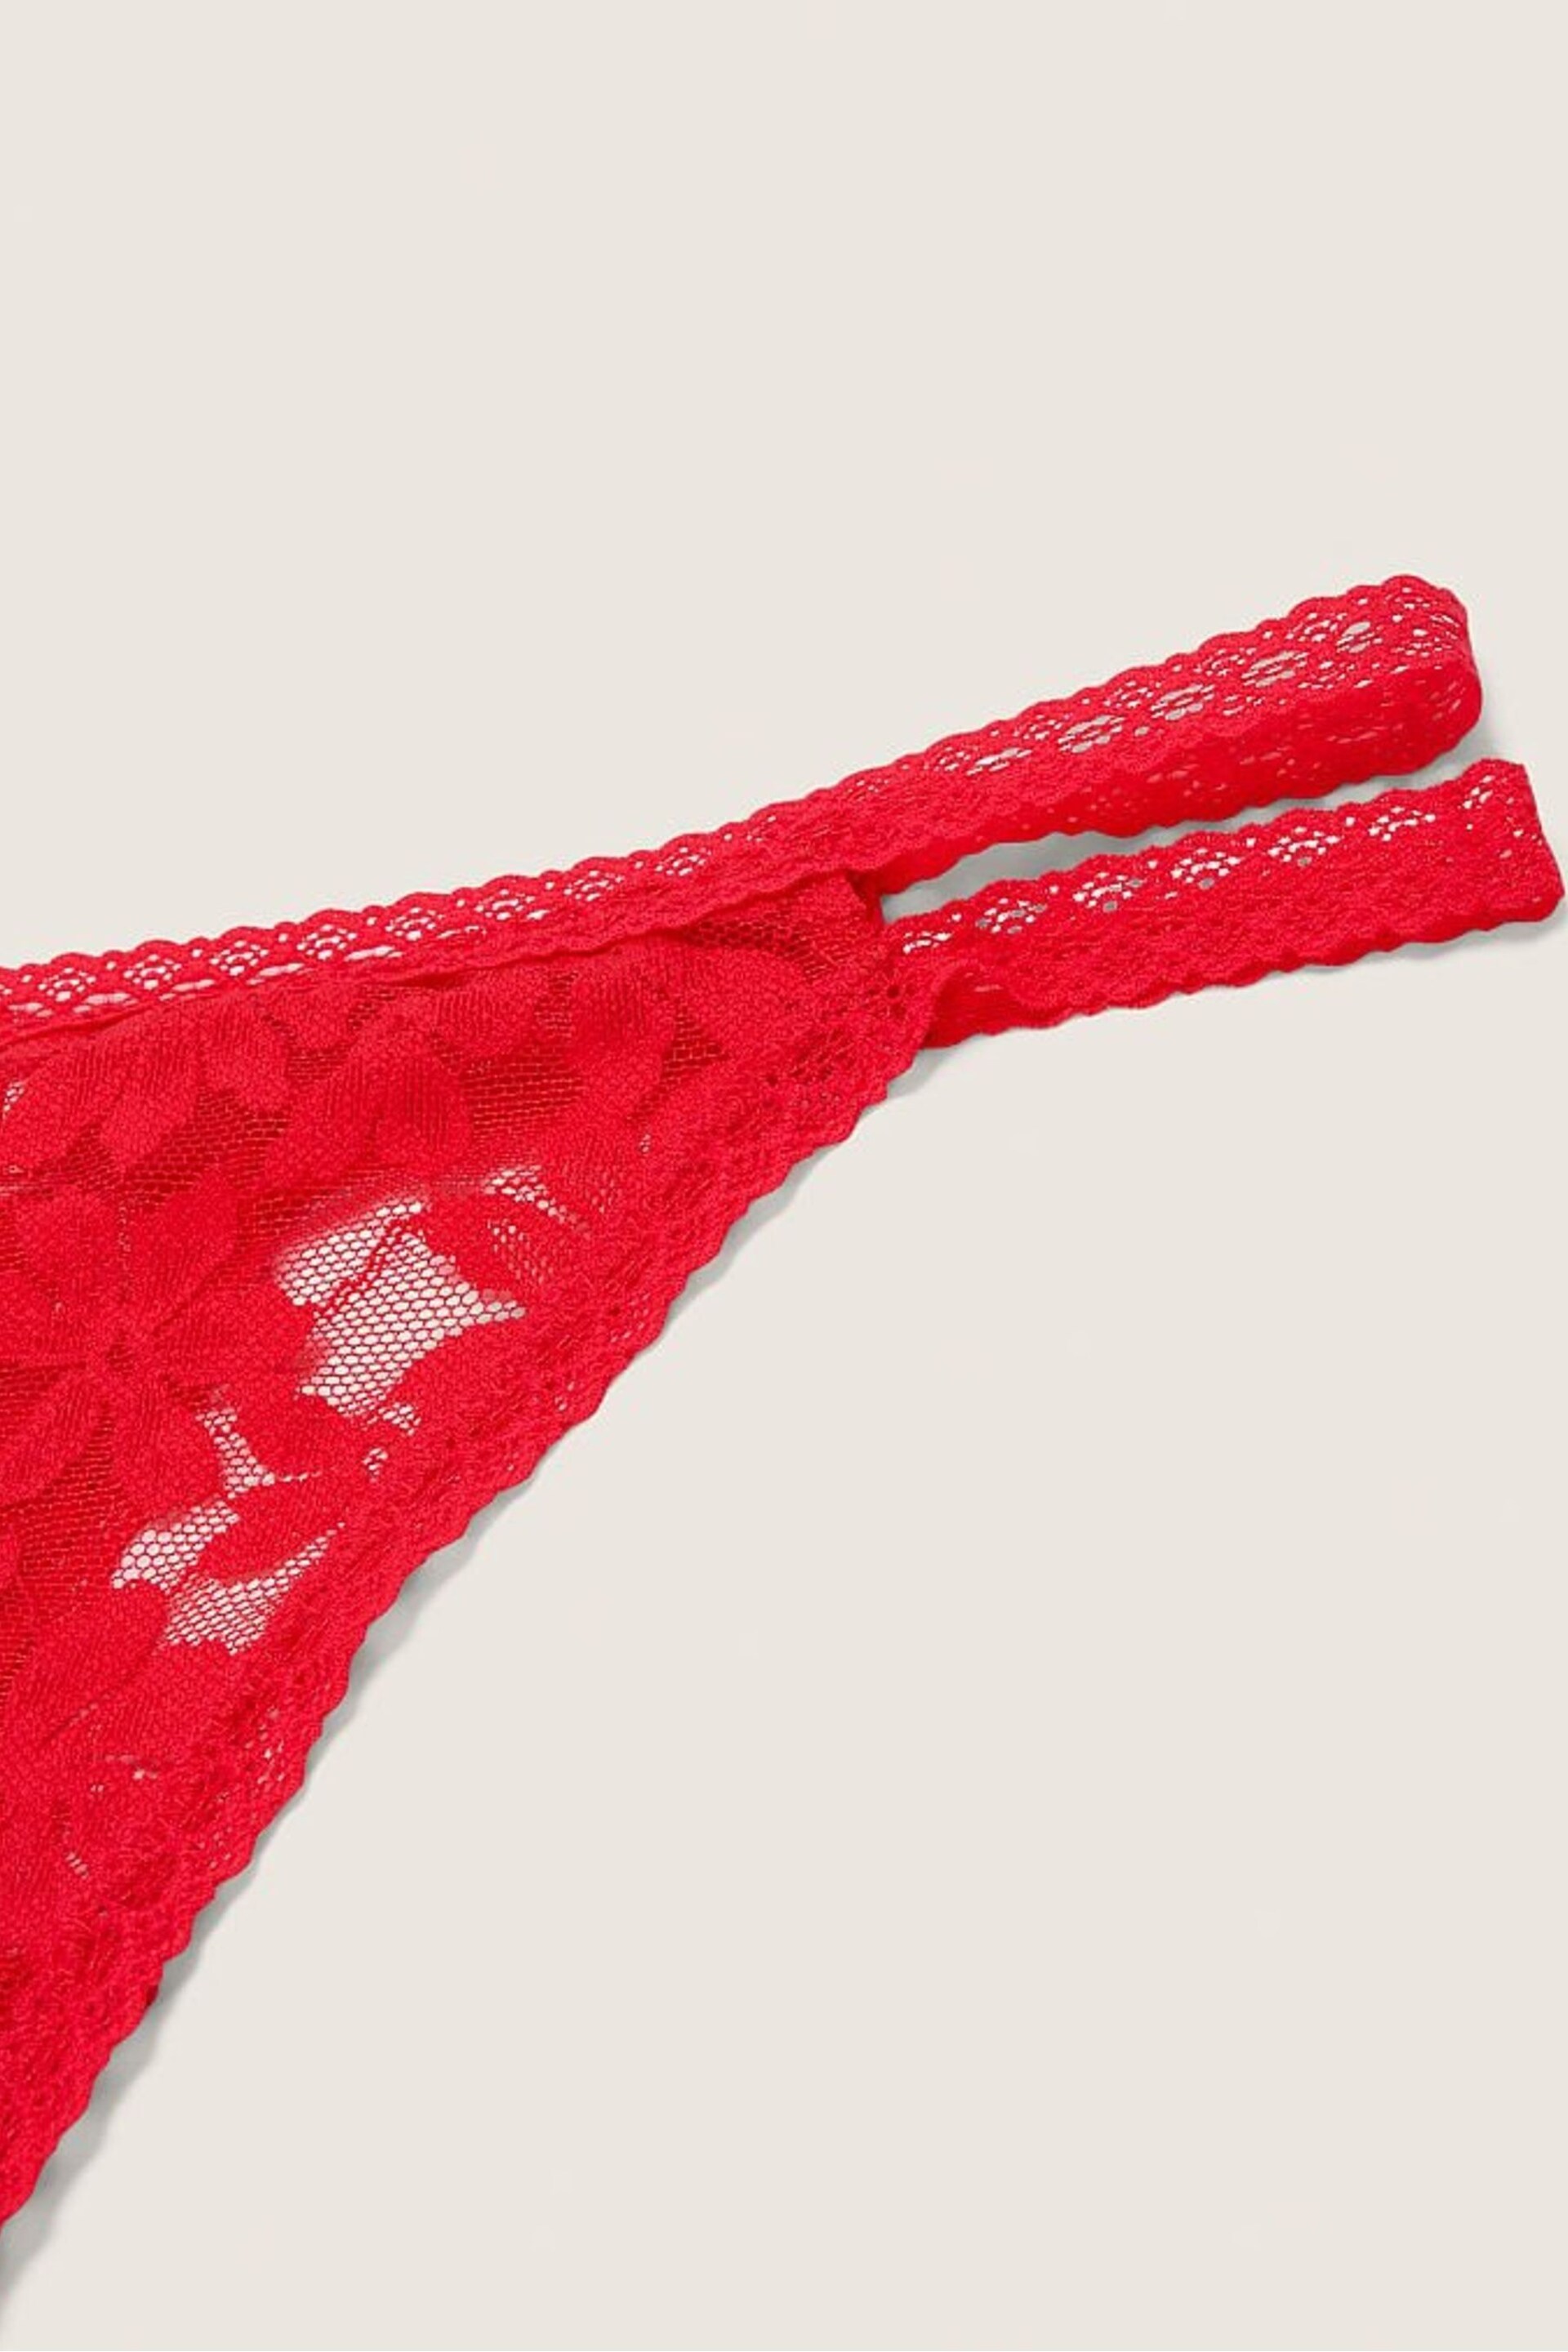 Victoria's Secret PINK Red Pepper Strappy Lace Thong Knickers - Image 2 of 2